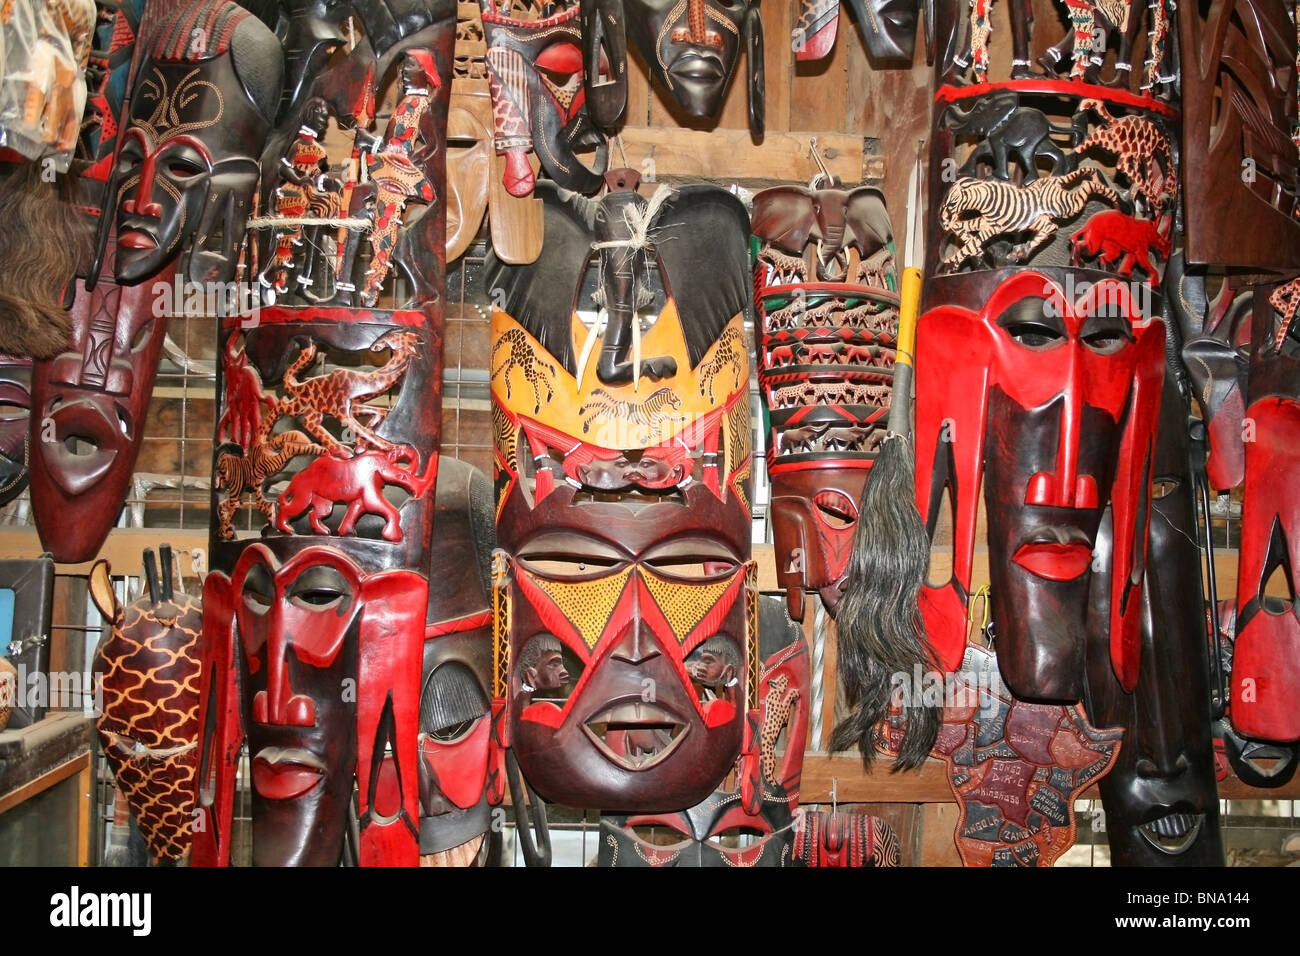 Masai wooden Masks and traditional craft items being sold at a souvenir shop near Masai Mara National Reserve Kenya, East Africa Stock Photo